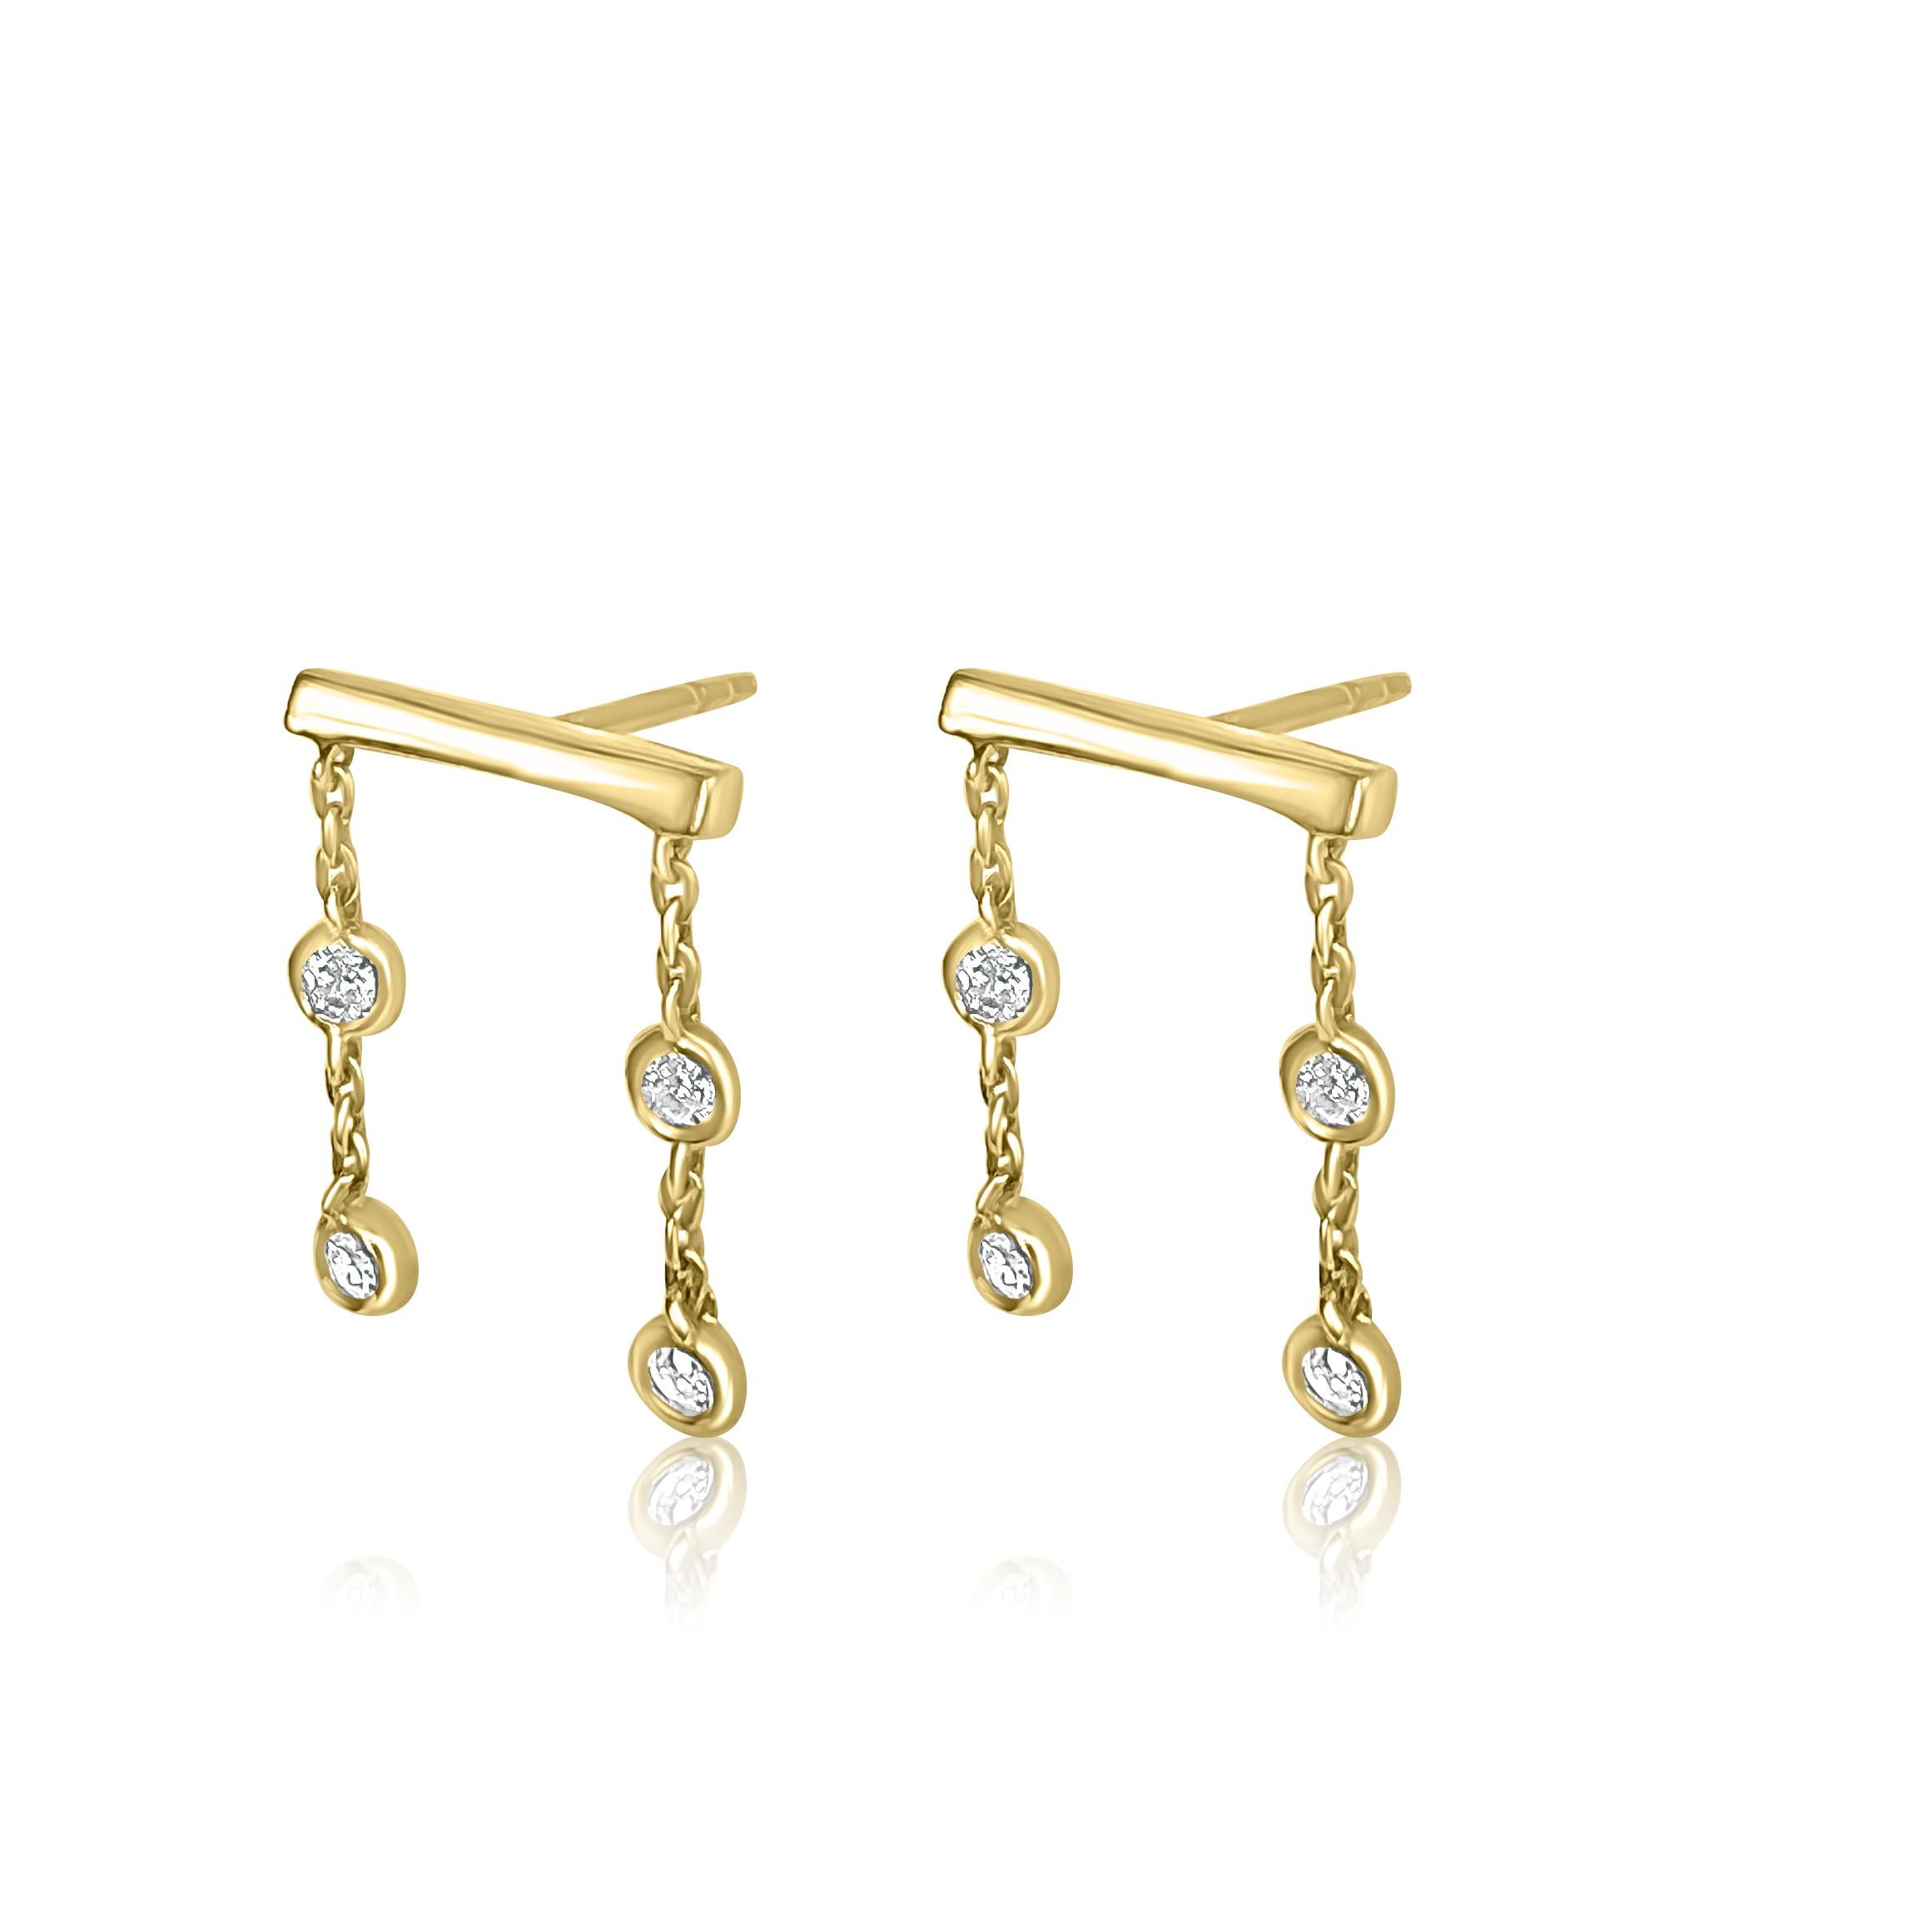 Balance and scale harmoniously coexist in these simple and versatile studs. The simple staple shape is accentuated with a chain and four dangling bezel-set diamonds on each earring and is a creative take on the 4:4 roll also called the “Square Pair